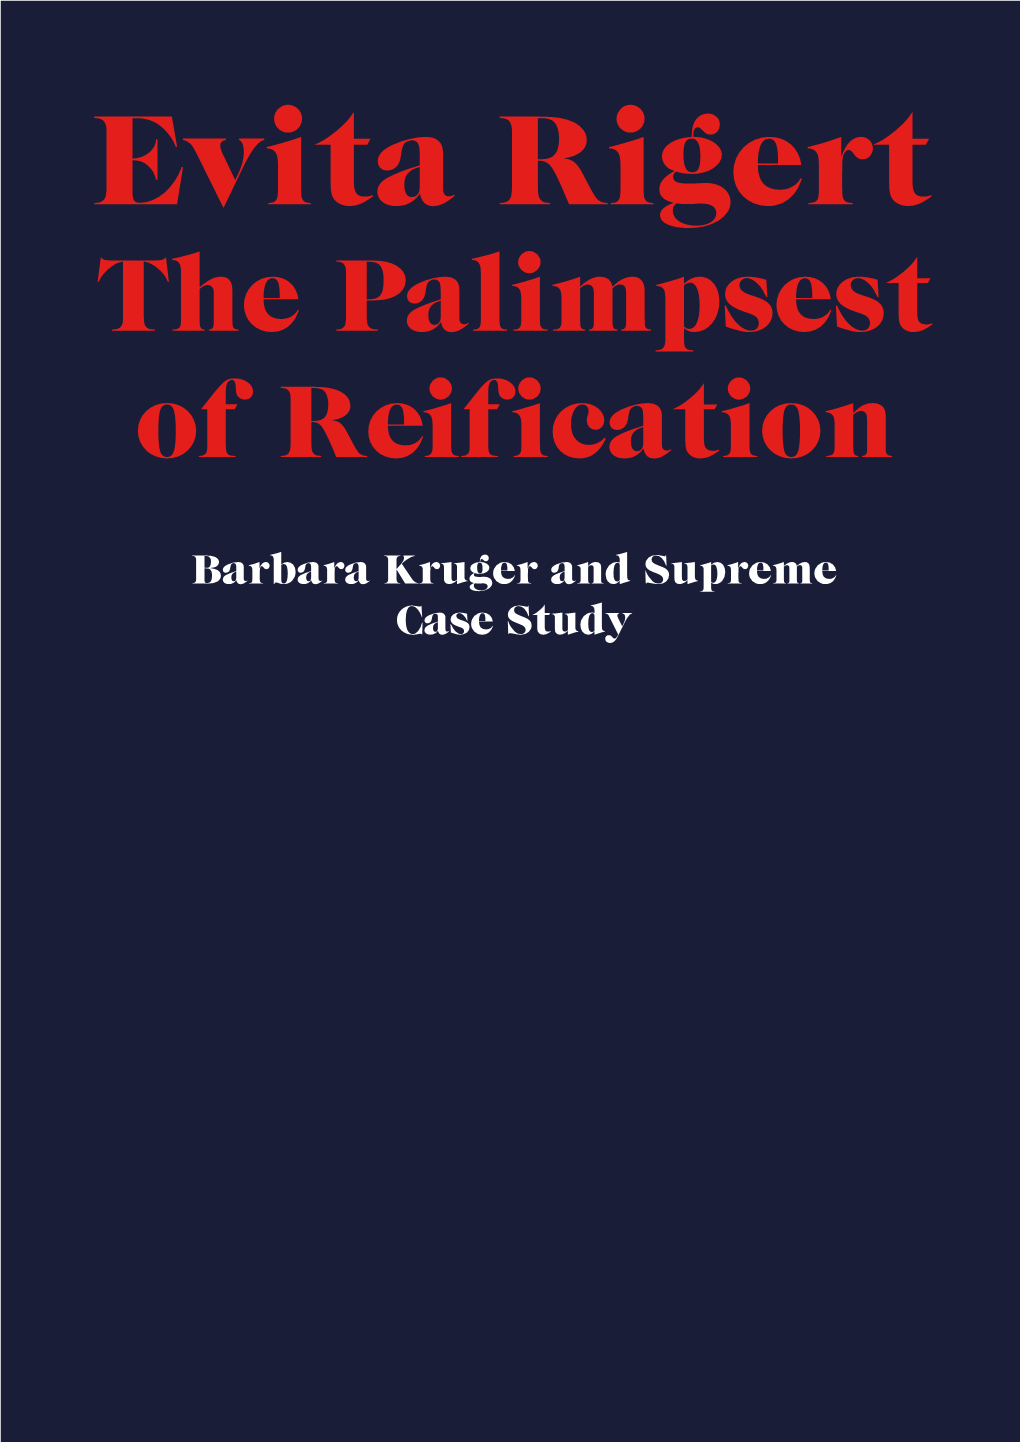 The Palimpsest of Reification